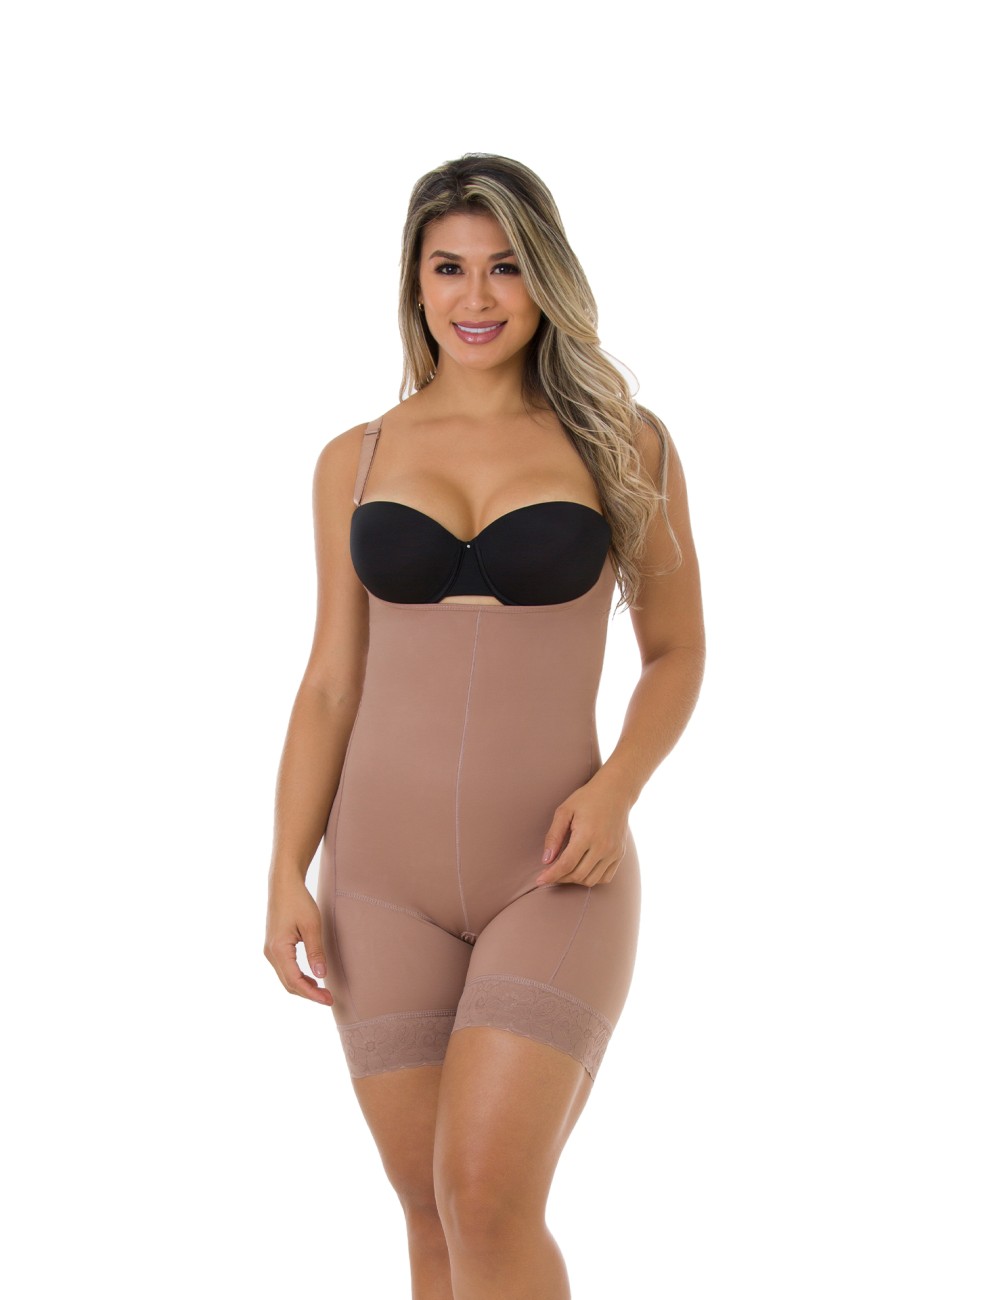 Hourglass girdle with adjustable straps, Colombian girdles